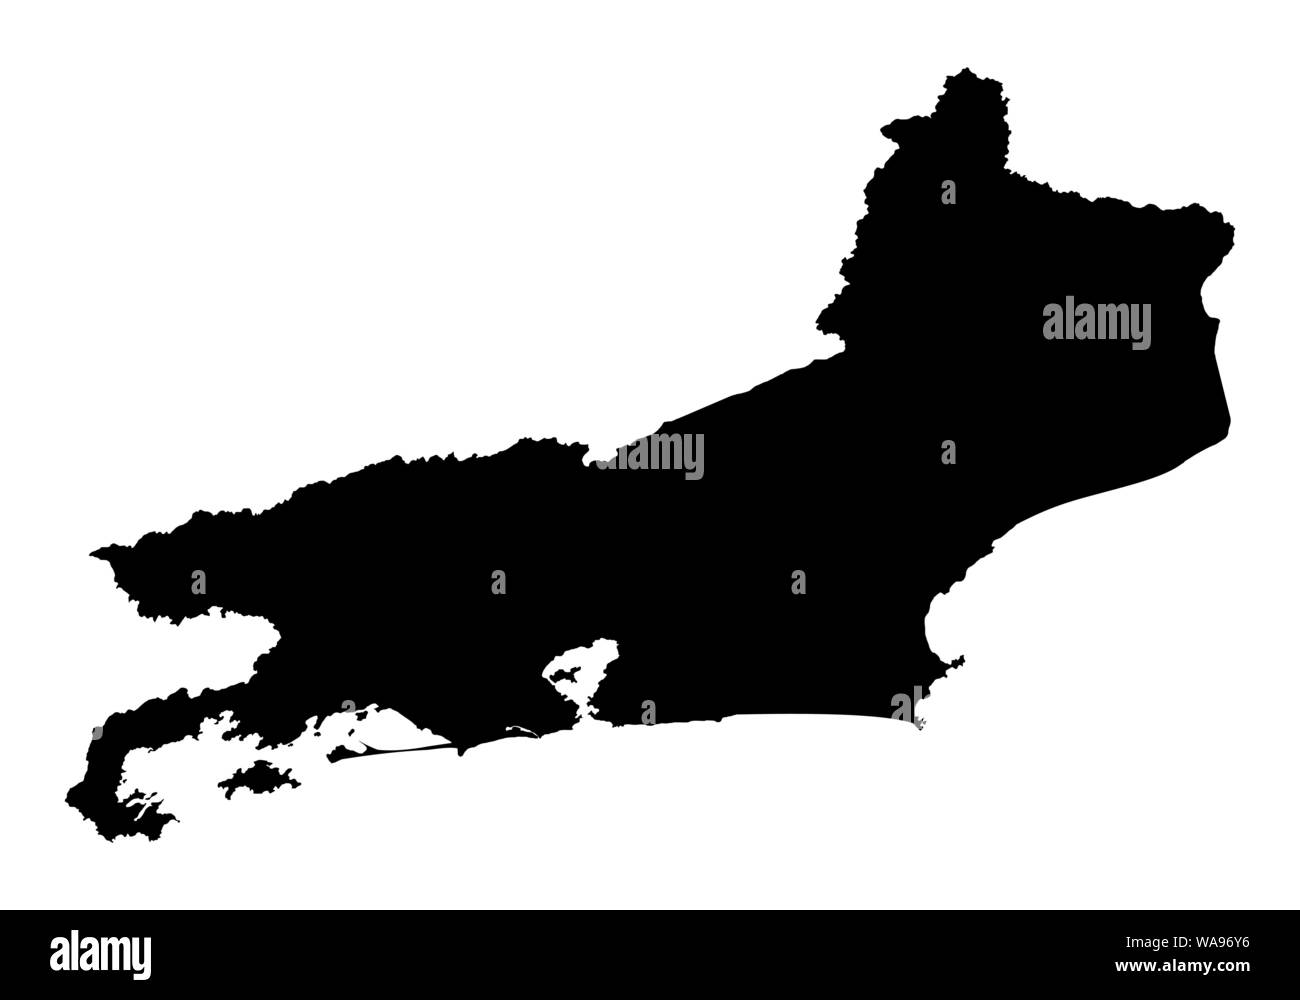 Rio de Janeiro State dark silhouette map isolated on white background Stock Vector